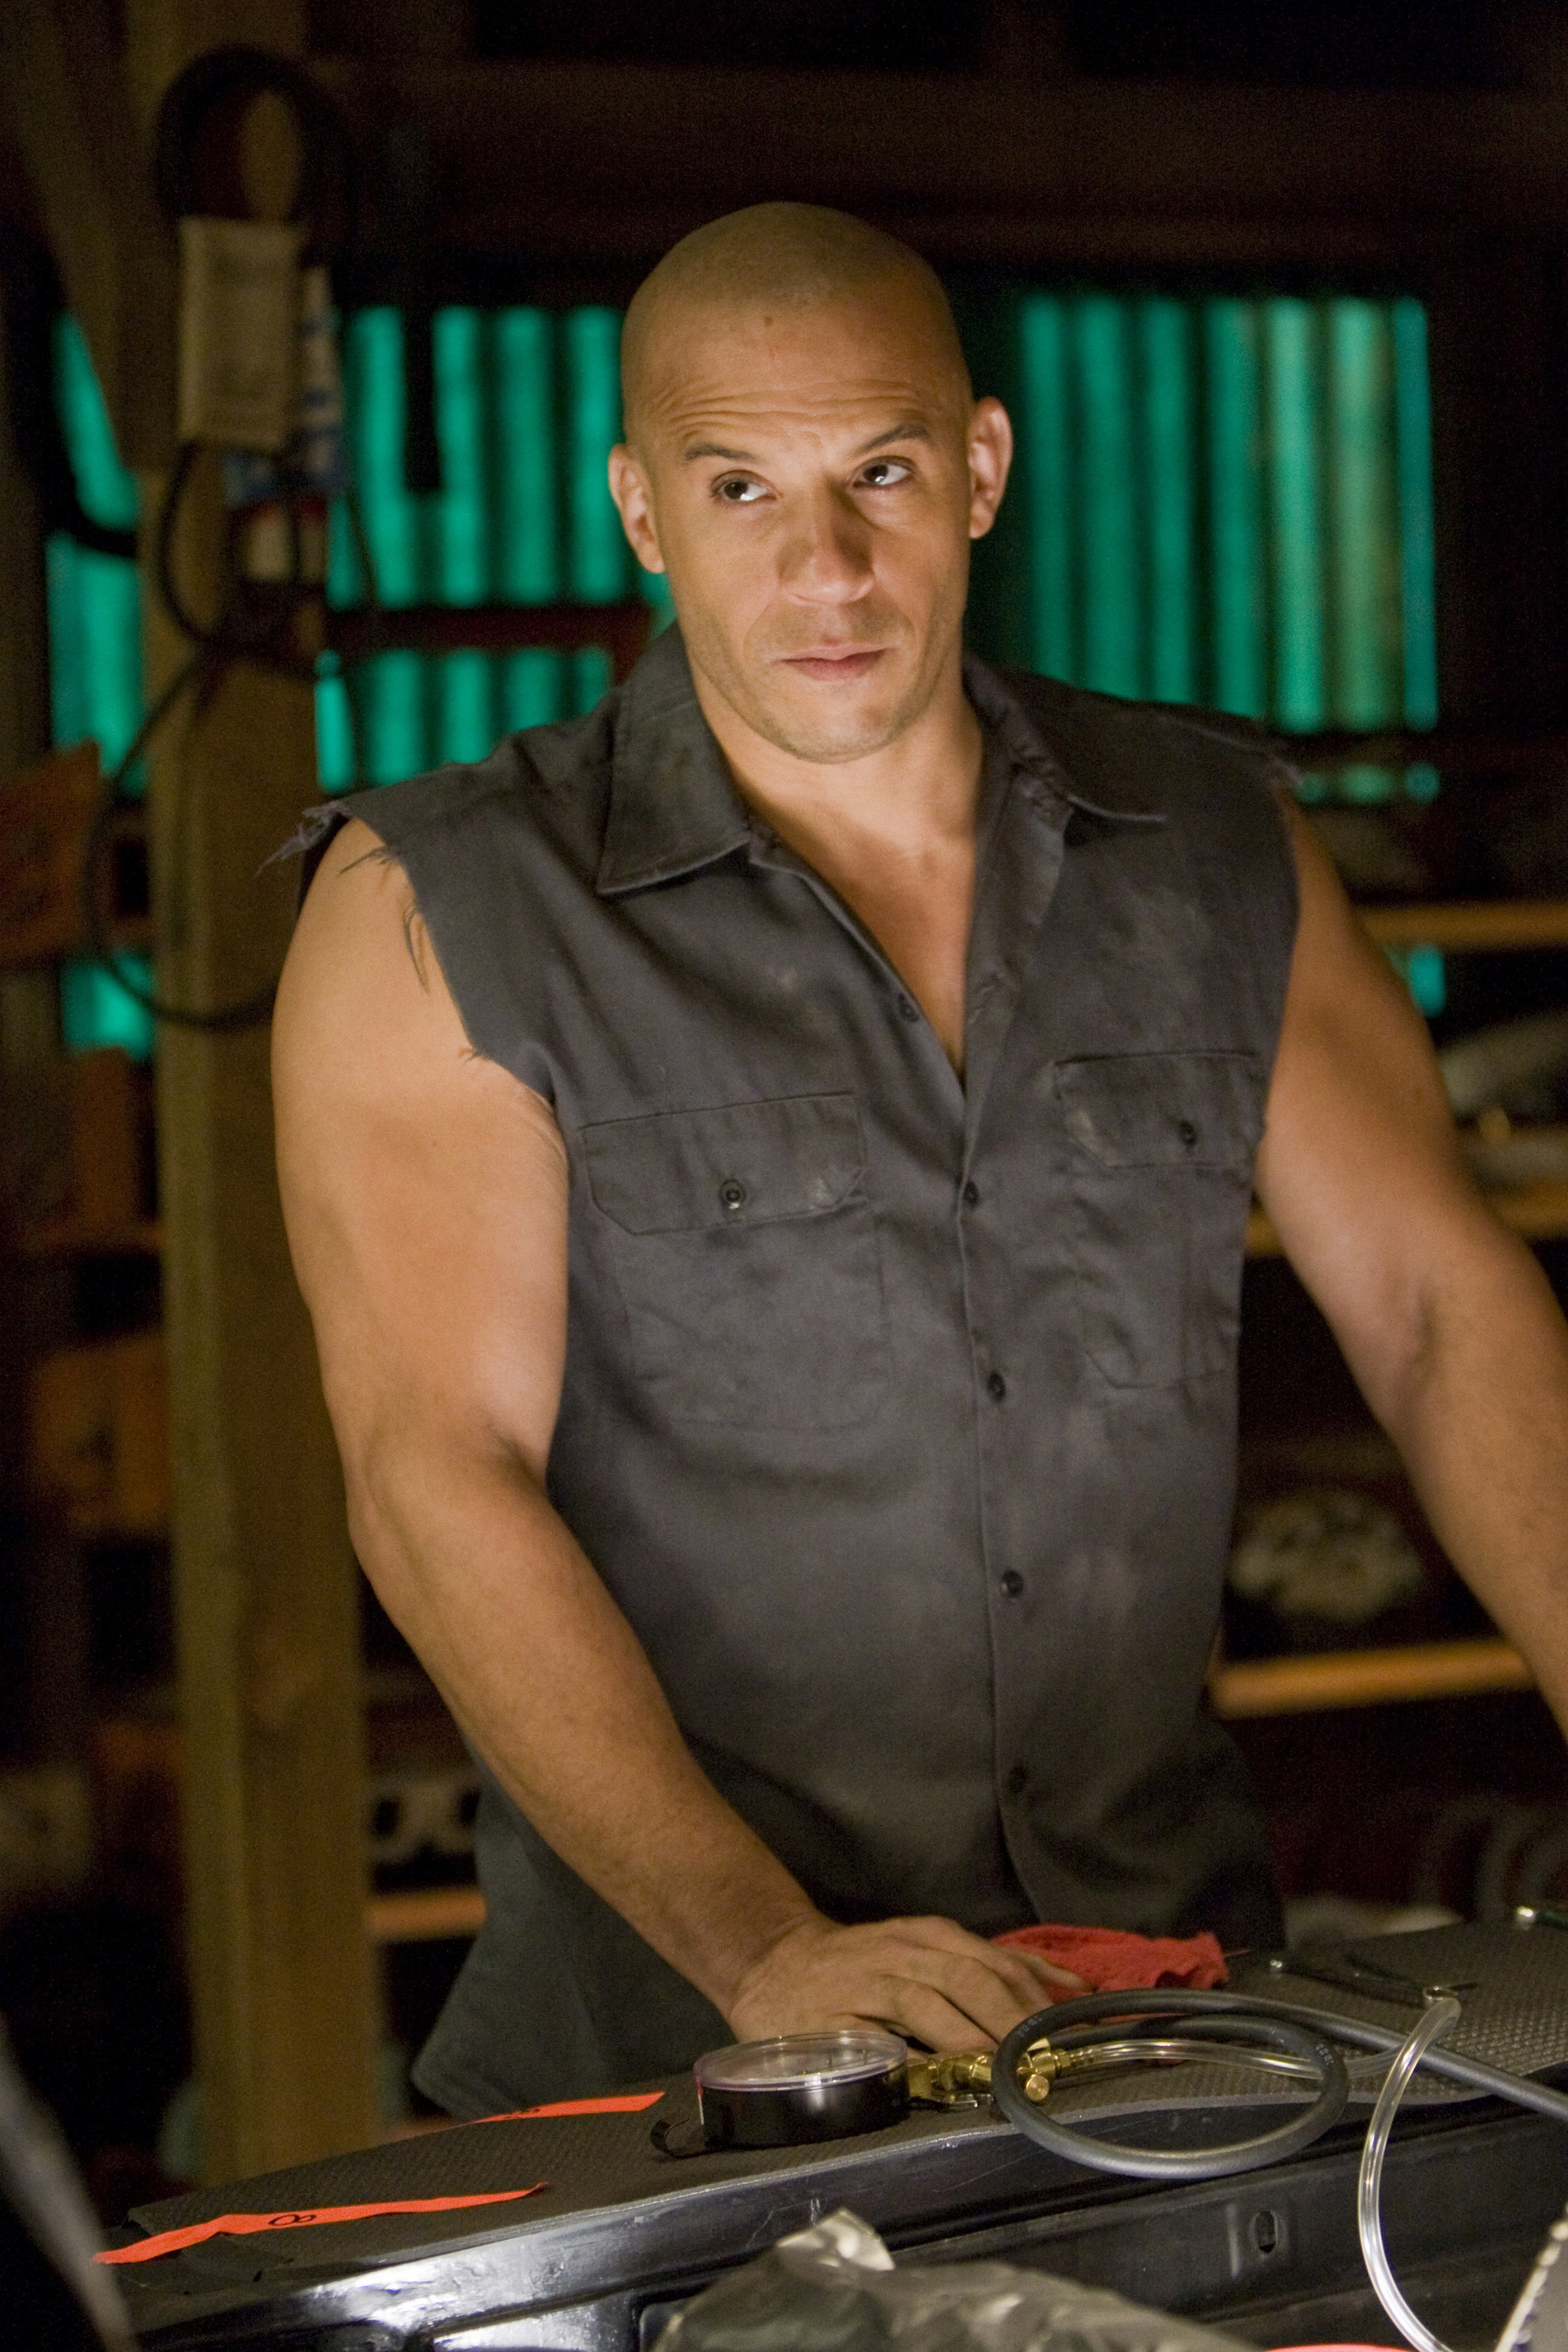 New Fast and Furious - Upcoming Movies Photo (3971830) - Fanpop1707 x 2560